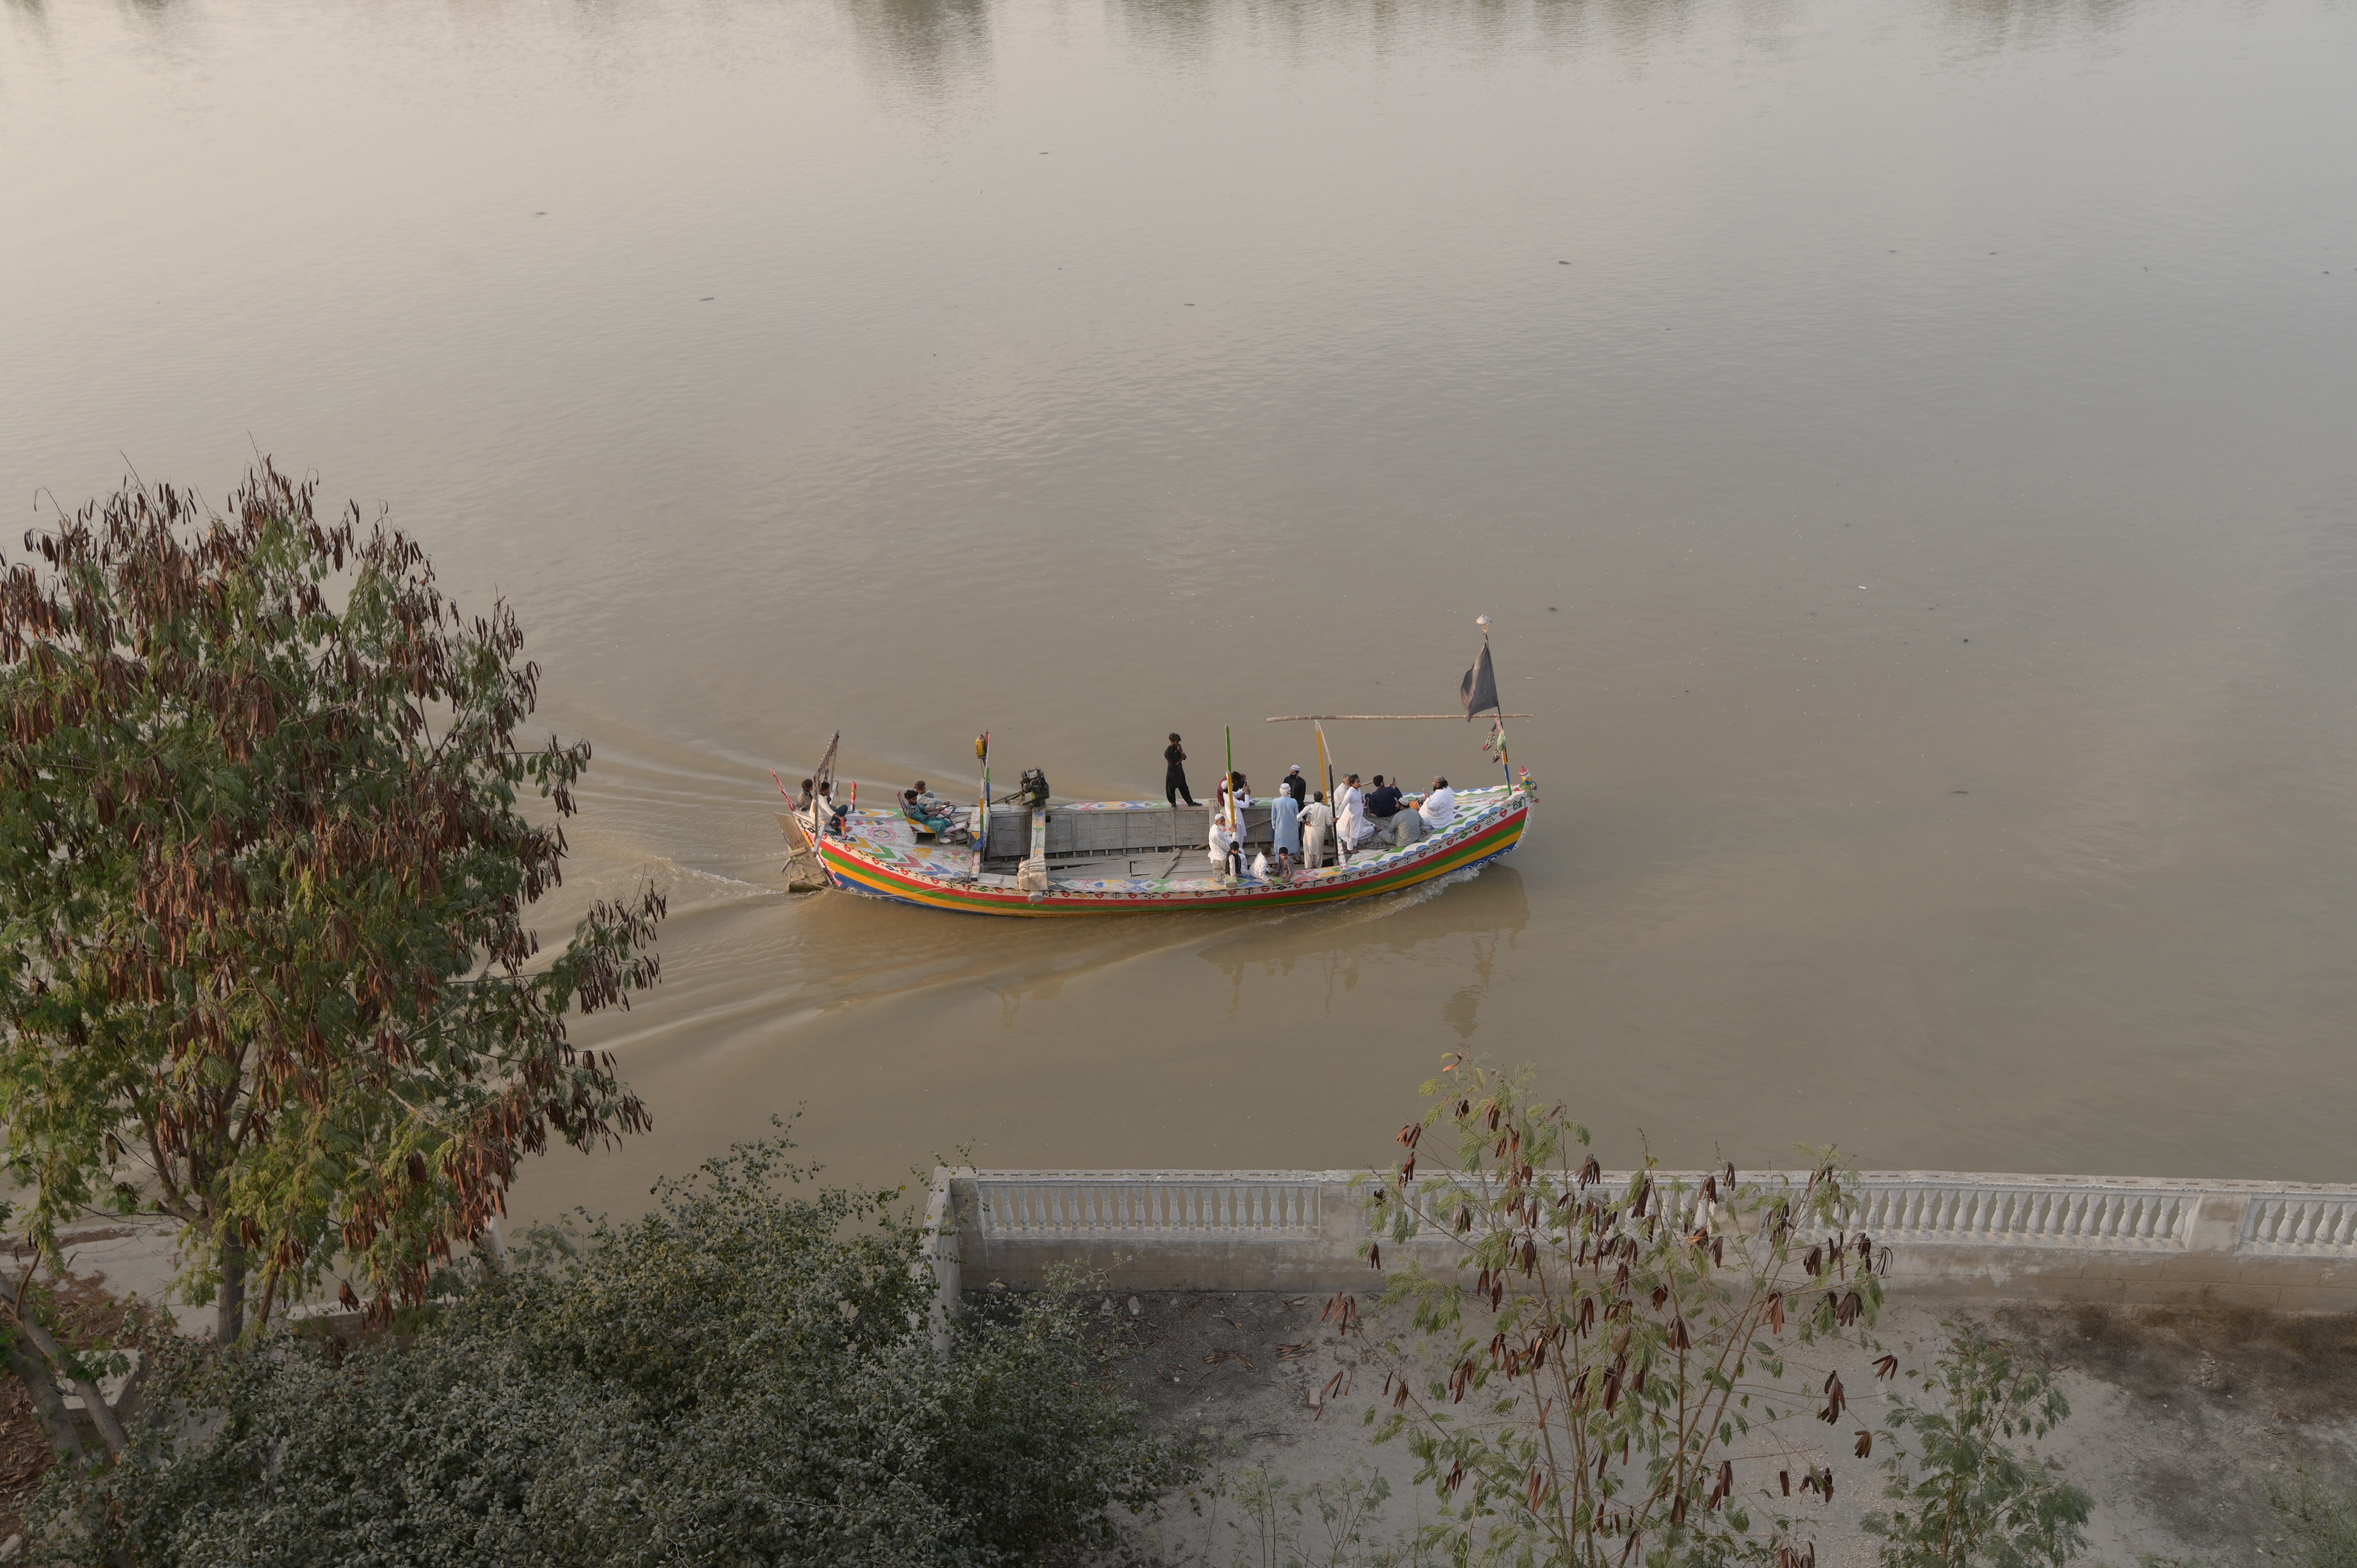 A boat passing by the river